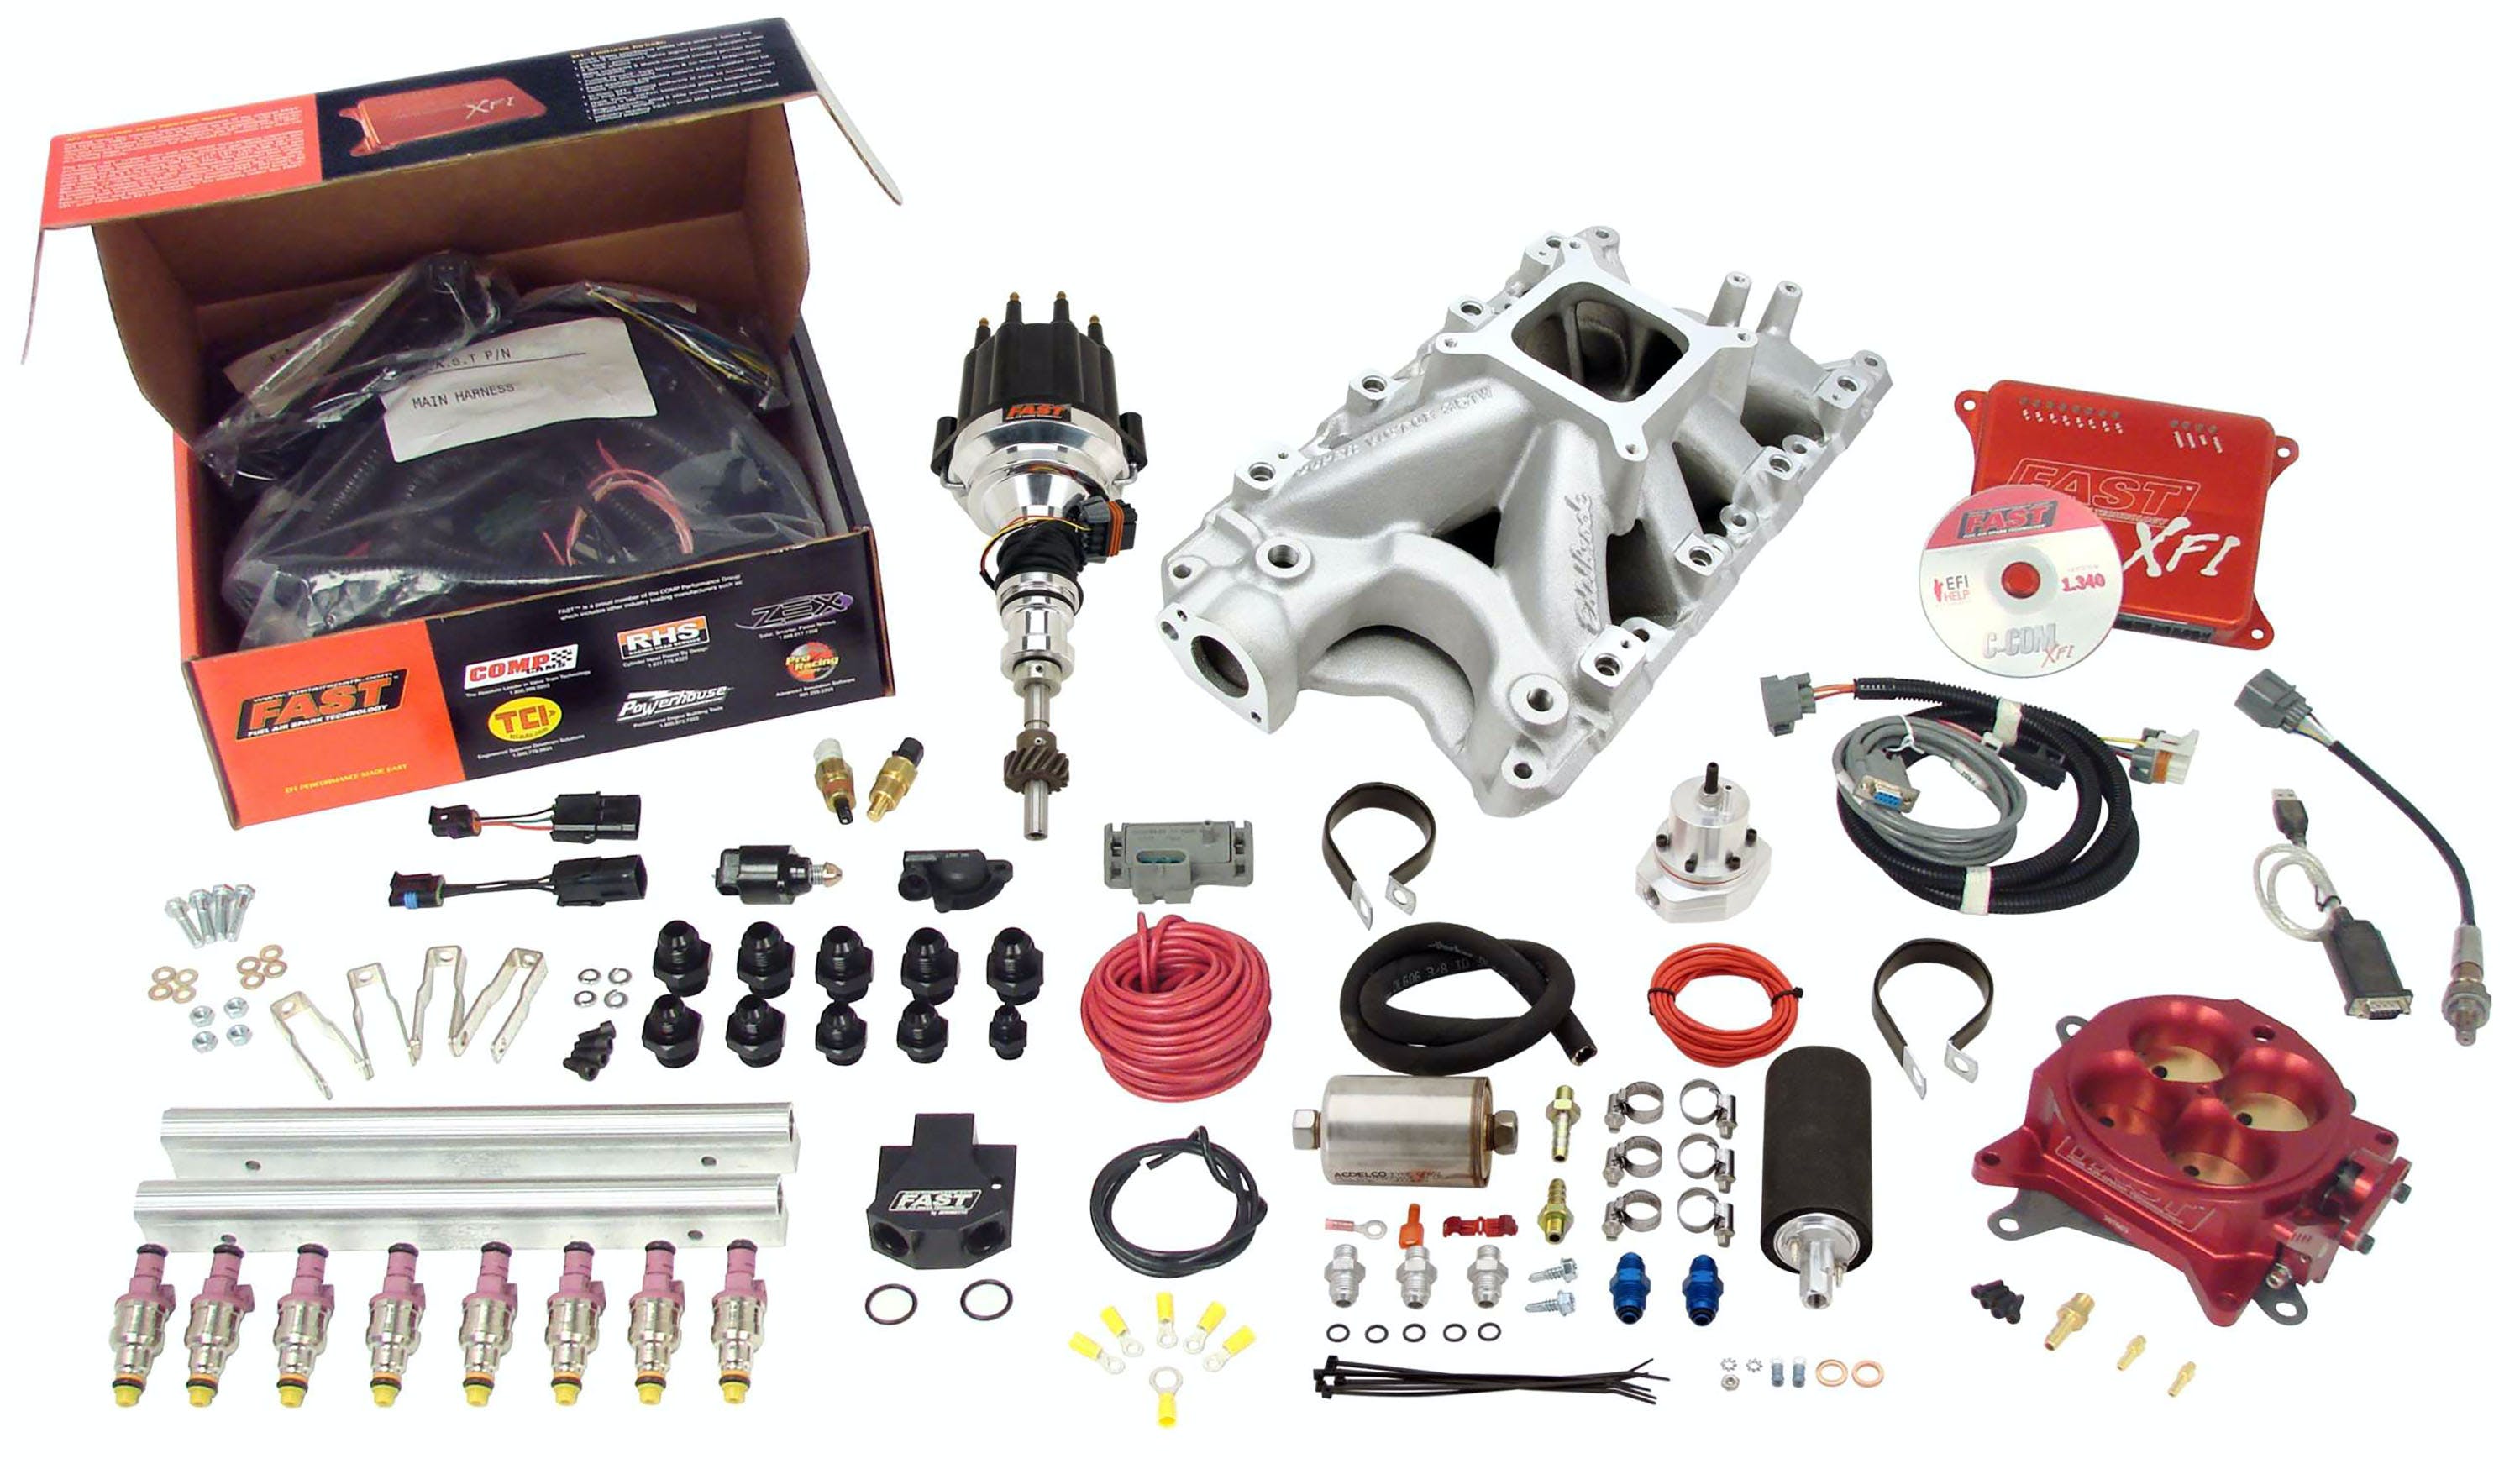 FAST - Fuel Air Spark Technology 3031302-10 XFI SBF Kit with 1000HP Pump